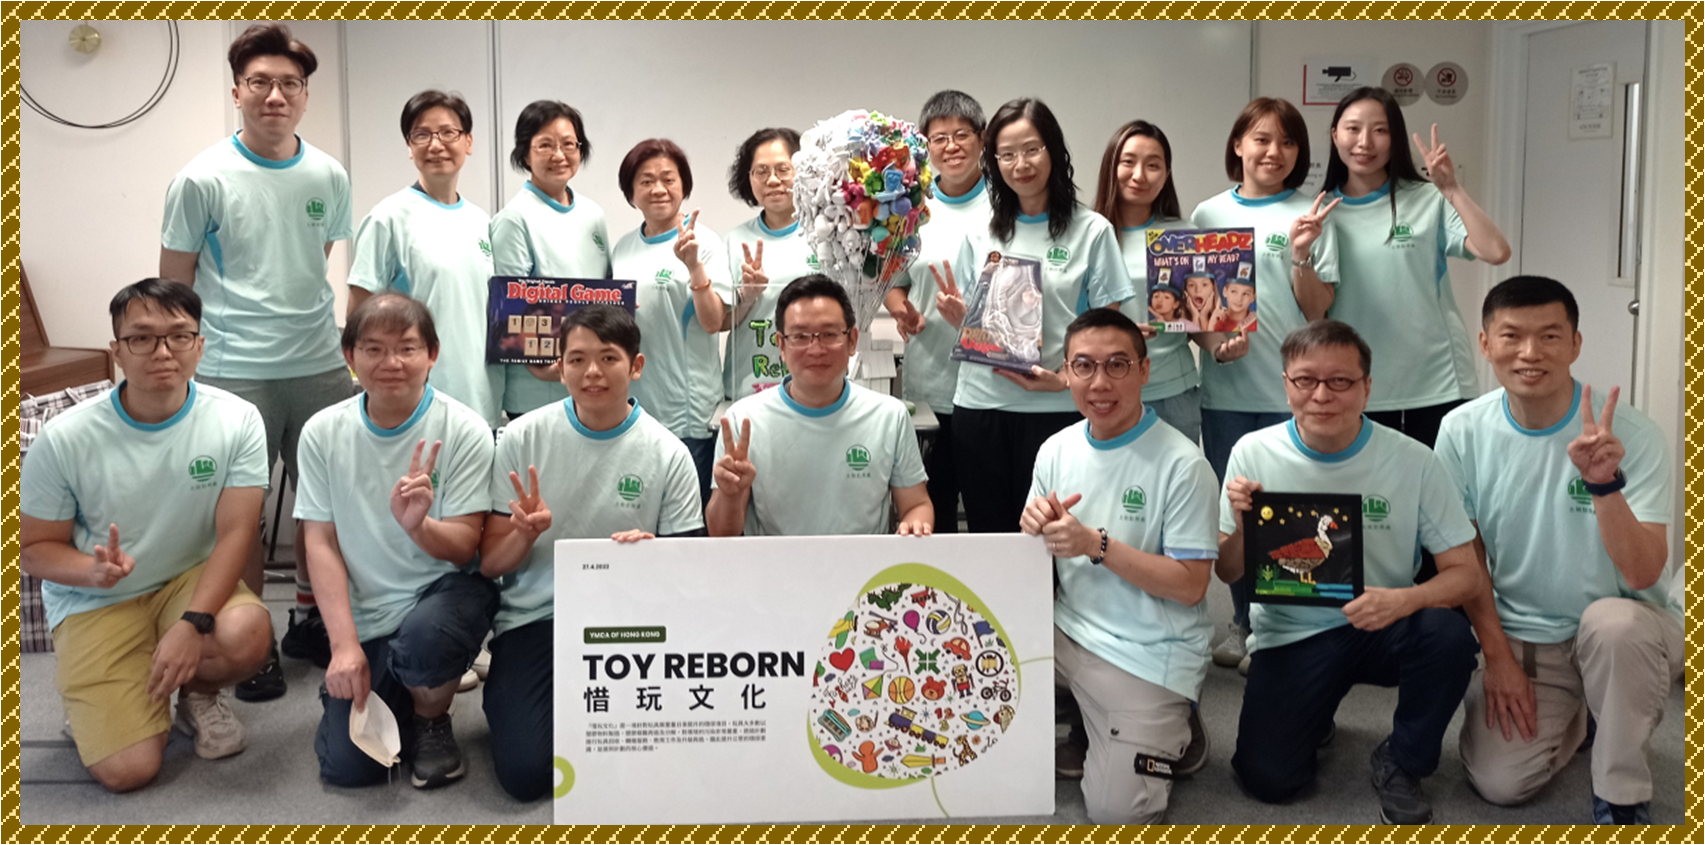 Toy Reborn Engineer - Give New Life to Second-hand Toys for Underprivileged Children_Image 1